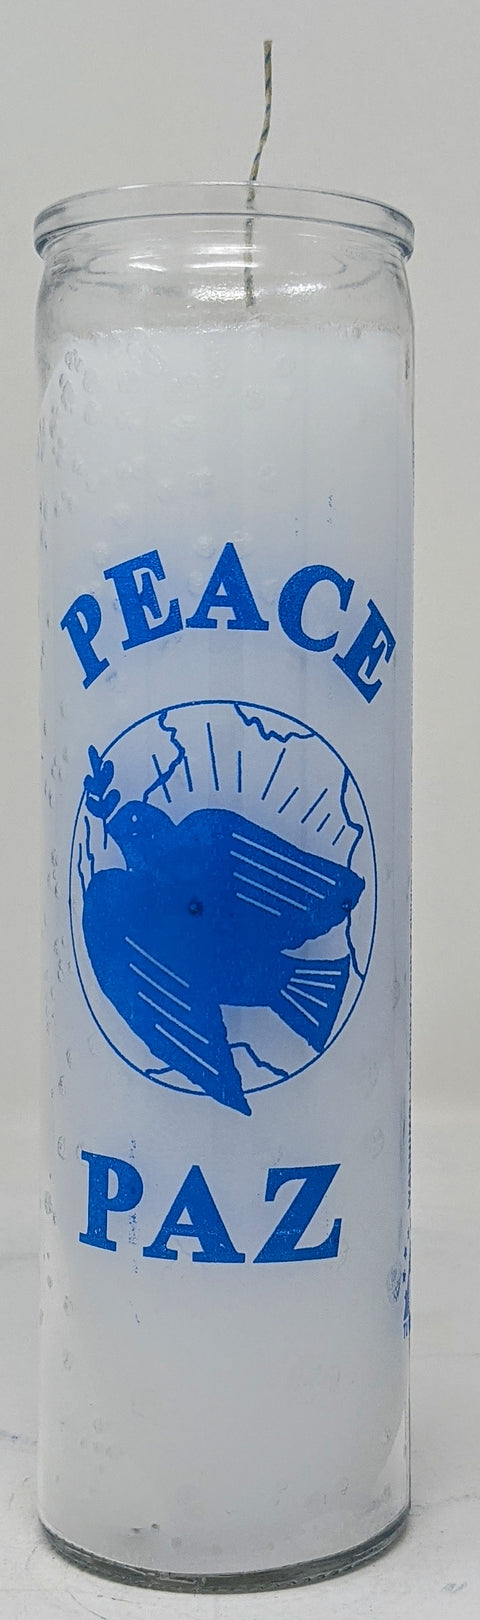 Peace 7 Day Candle